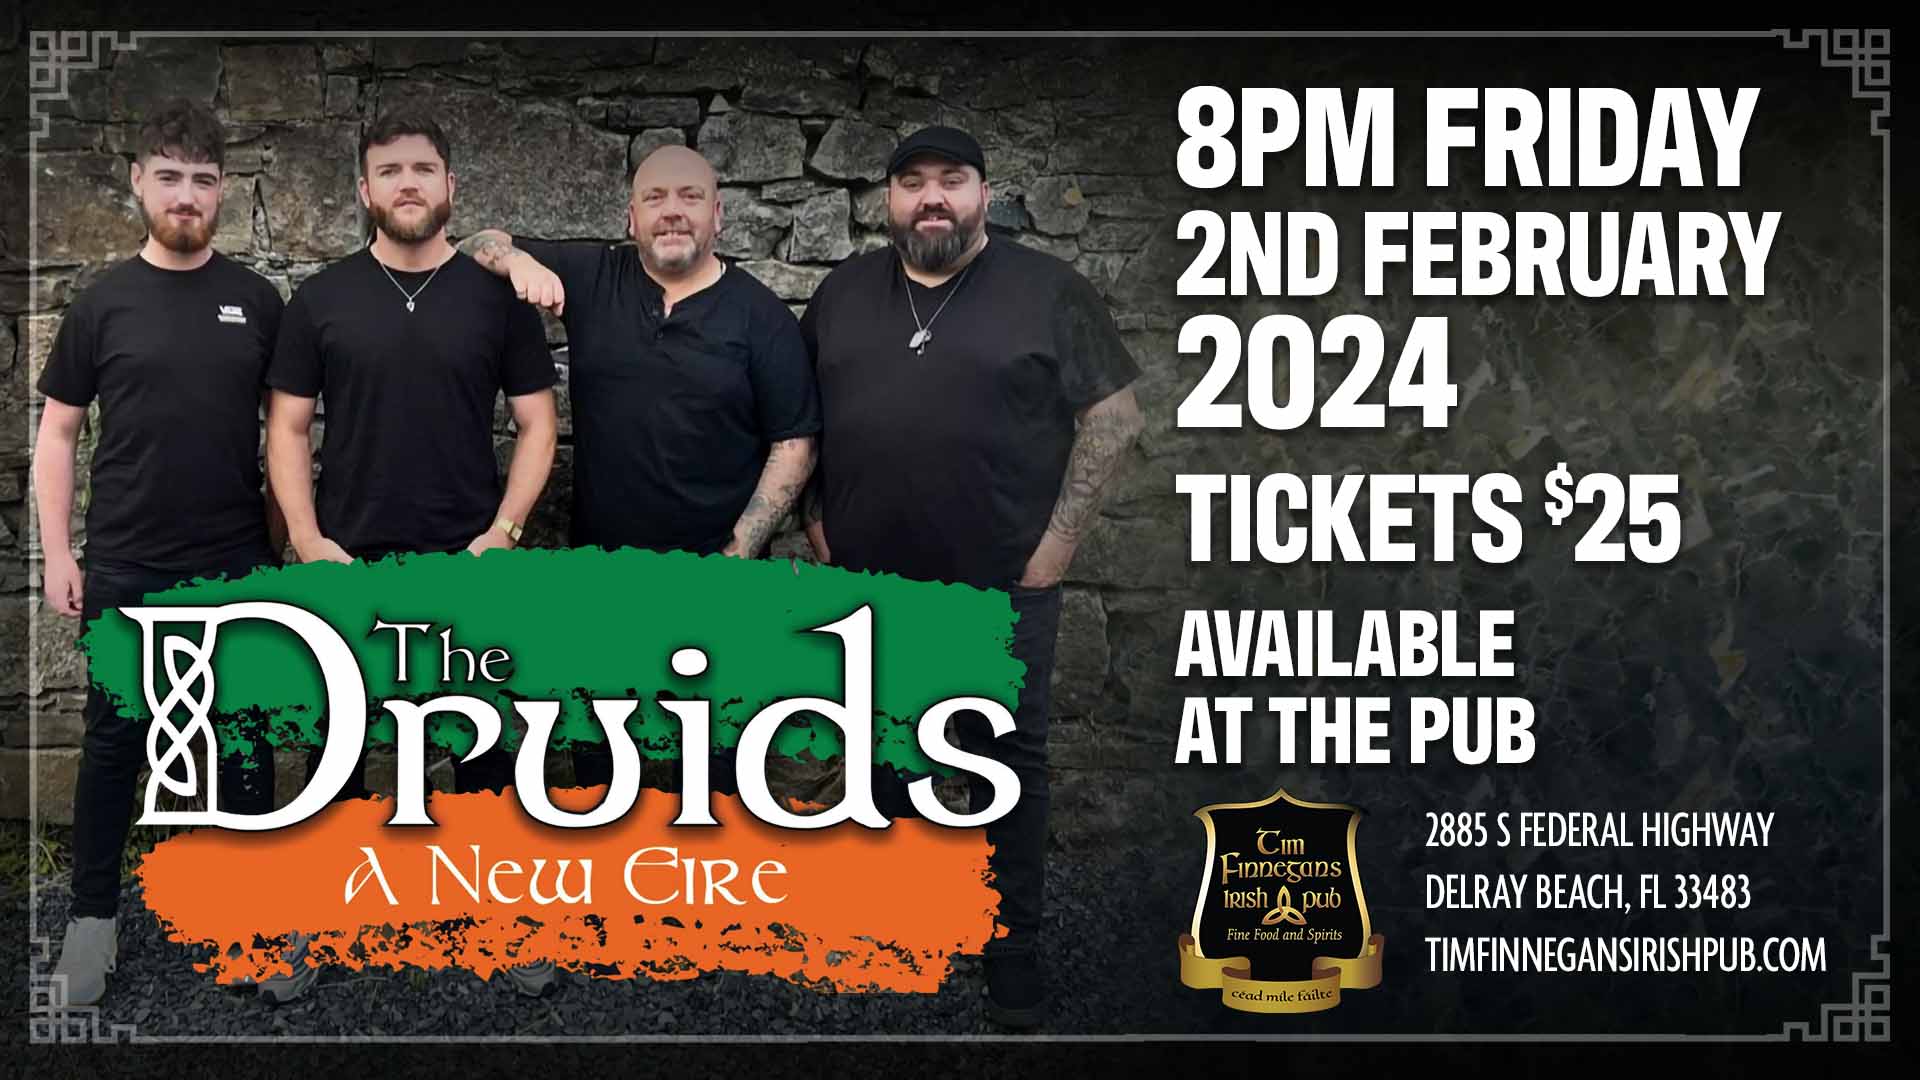 The Druids Award Winning Band one night only at Tim Finnegans! Tickets $25 available at the pub